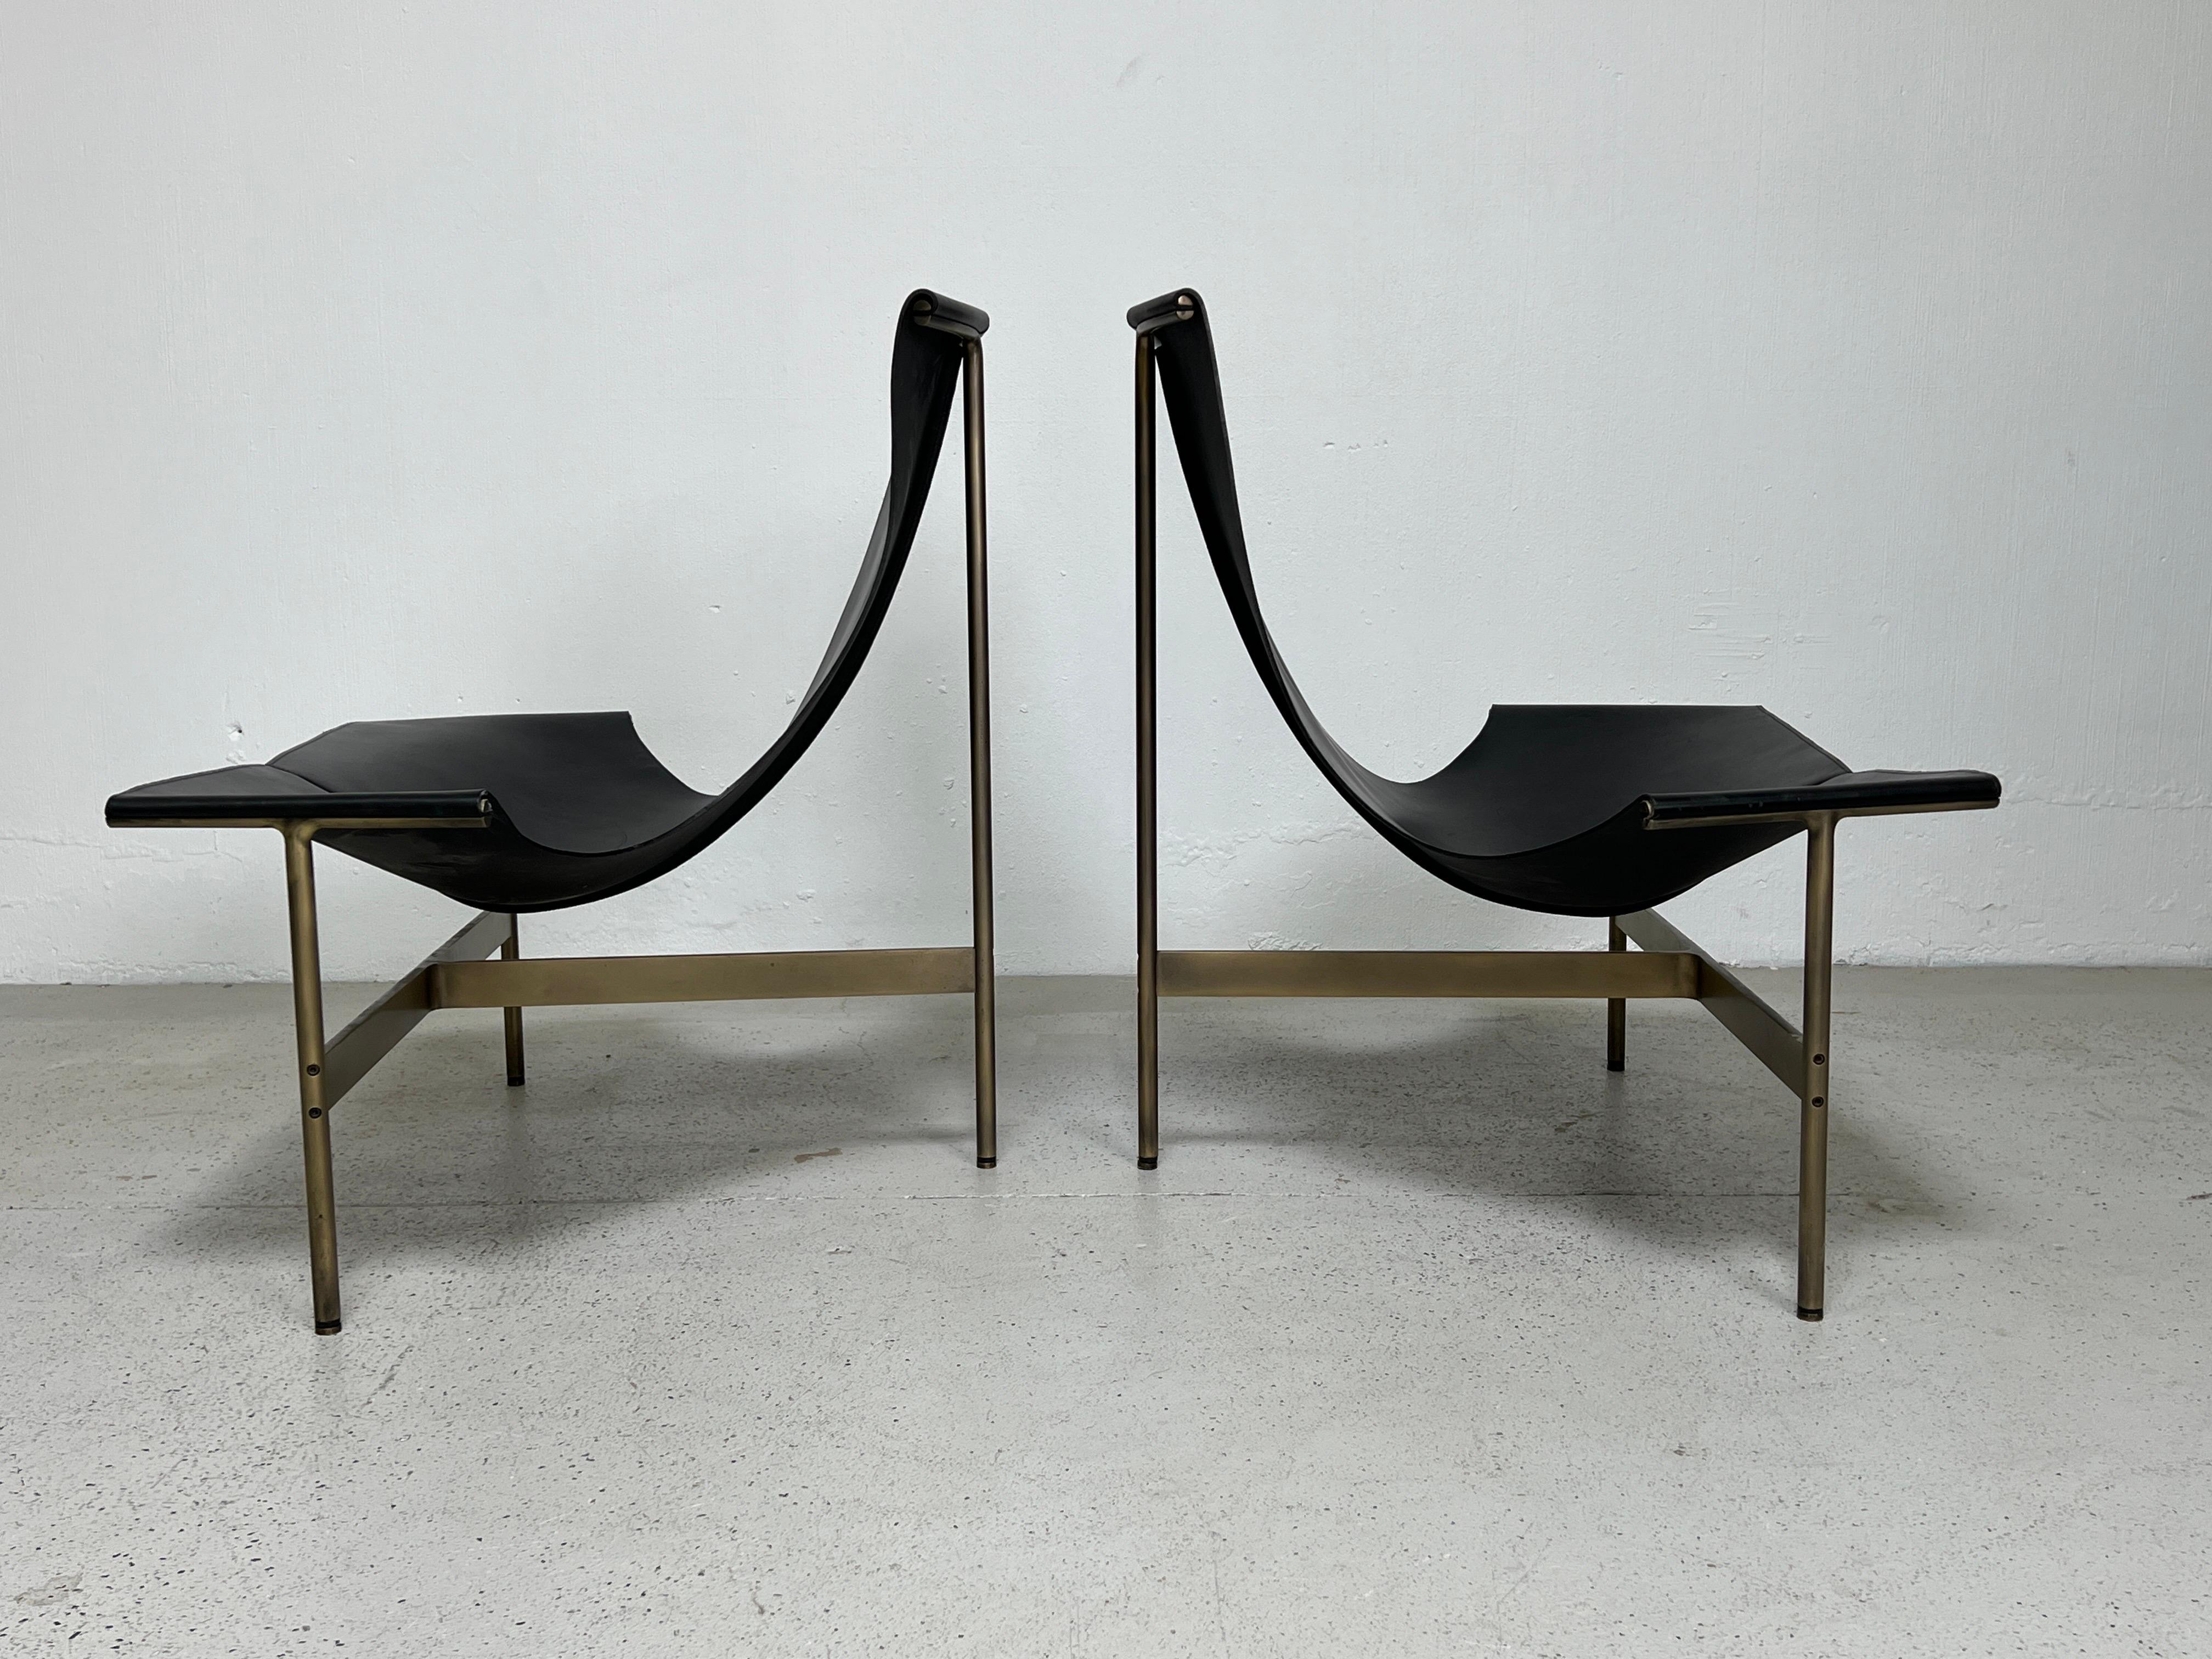 Pair of Bronze TG-15 Lounge Chair by Katavolos, Littell, & Kelley In Good Condition For Sale In Dallas, TX